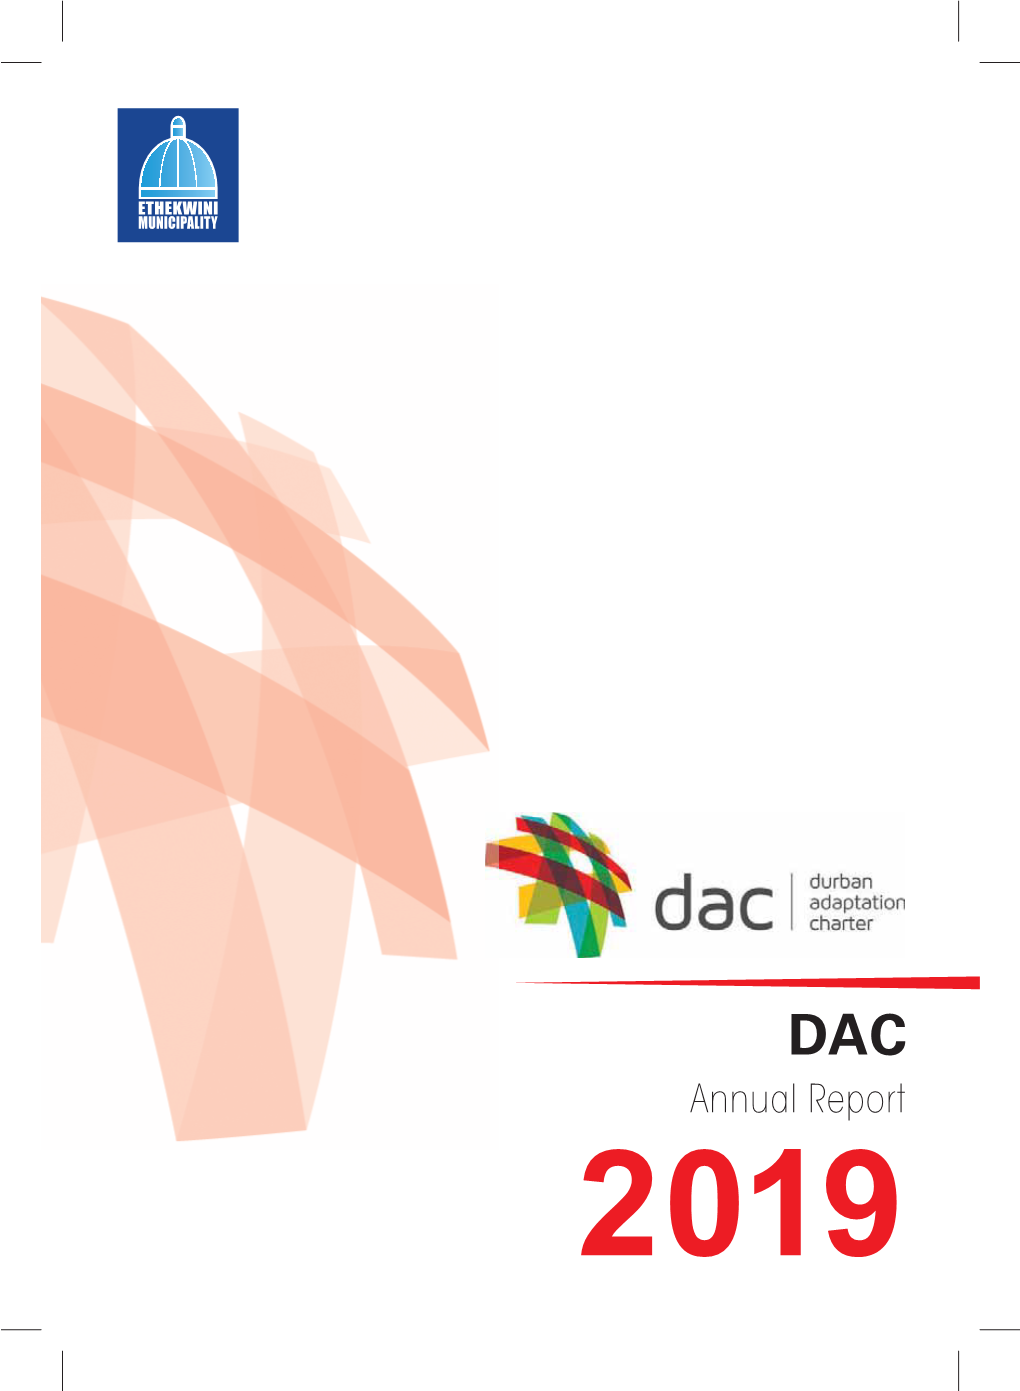 DAC Annual Report for 2019